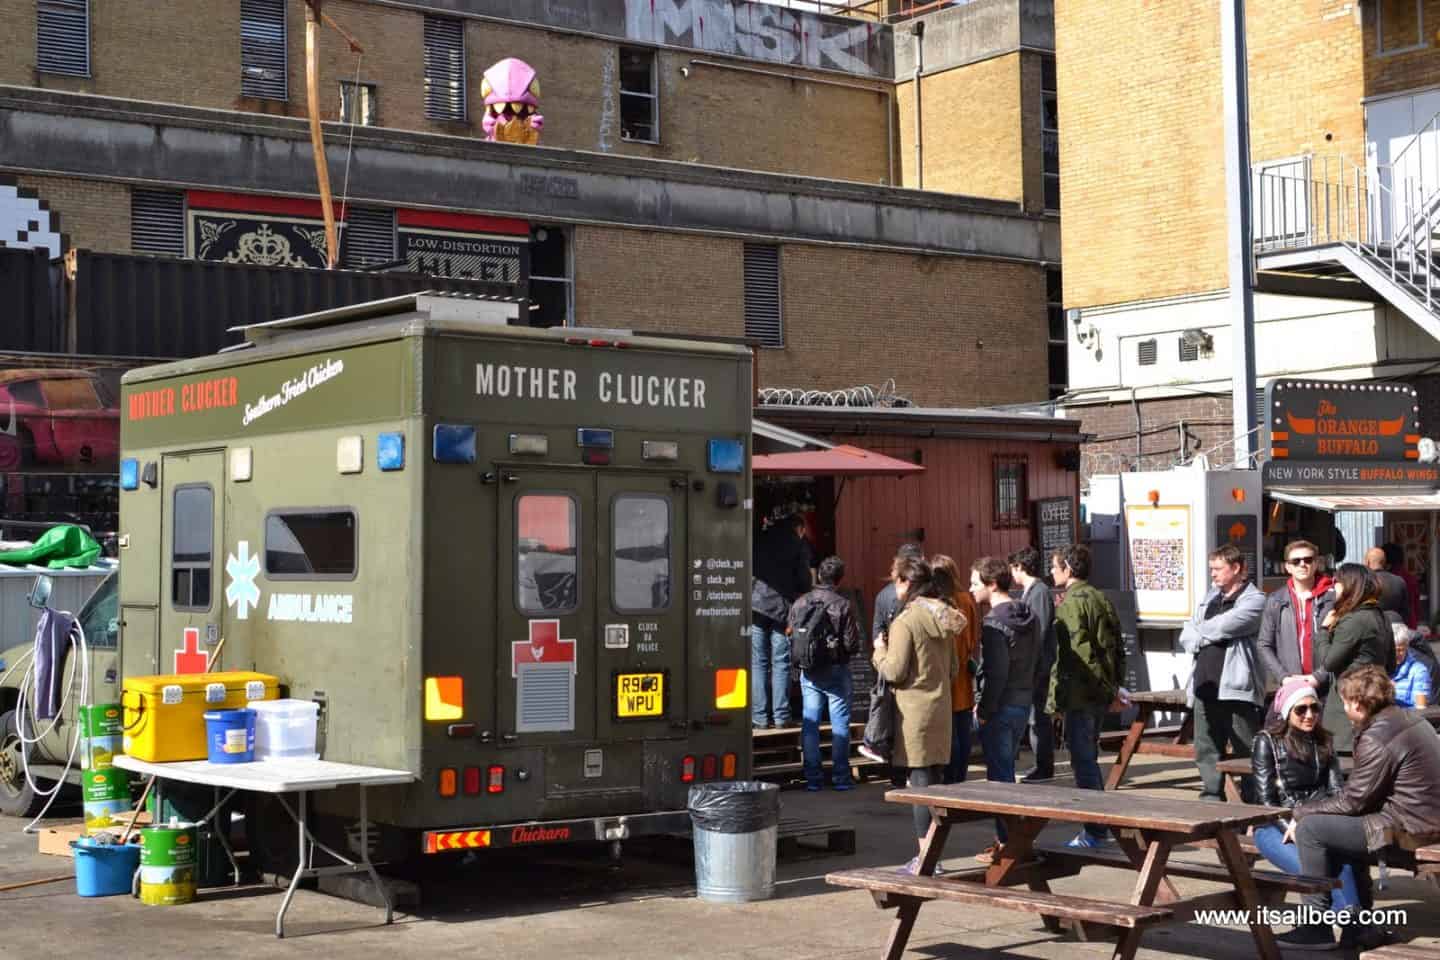 Shoreditch Mother Clucker Van - top free london attractions | top ten things to do in london for free | places to visit in london england for free